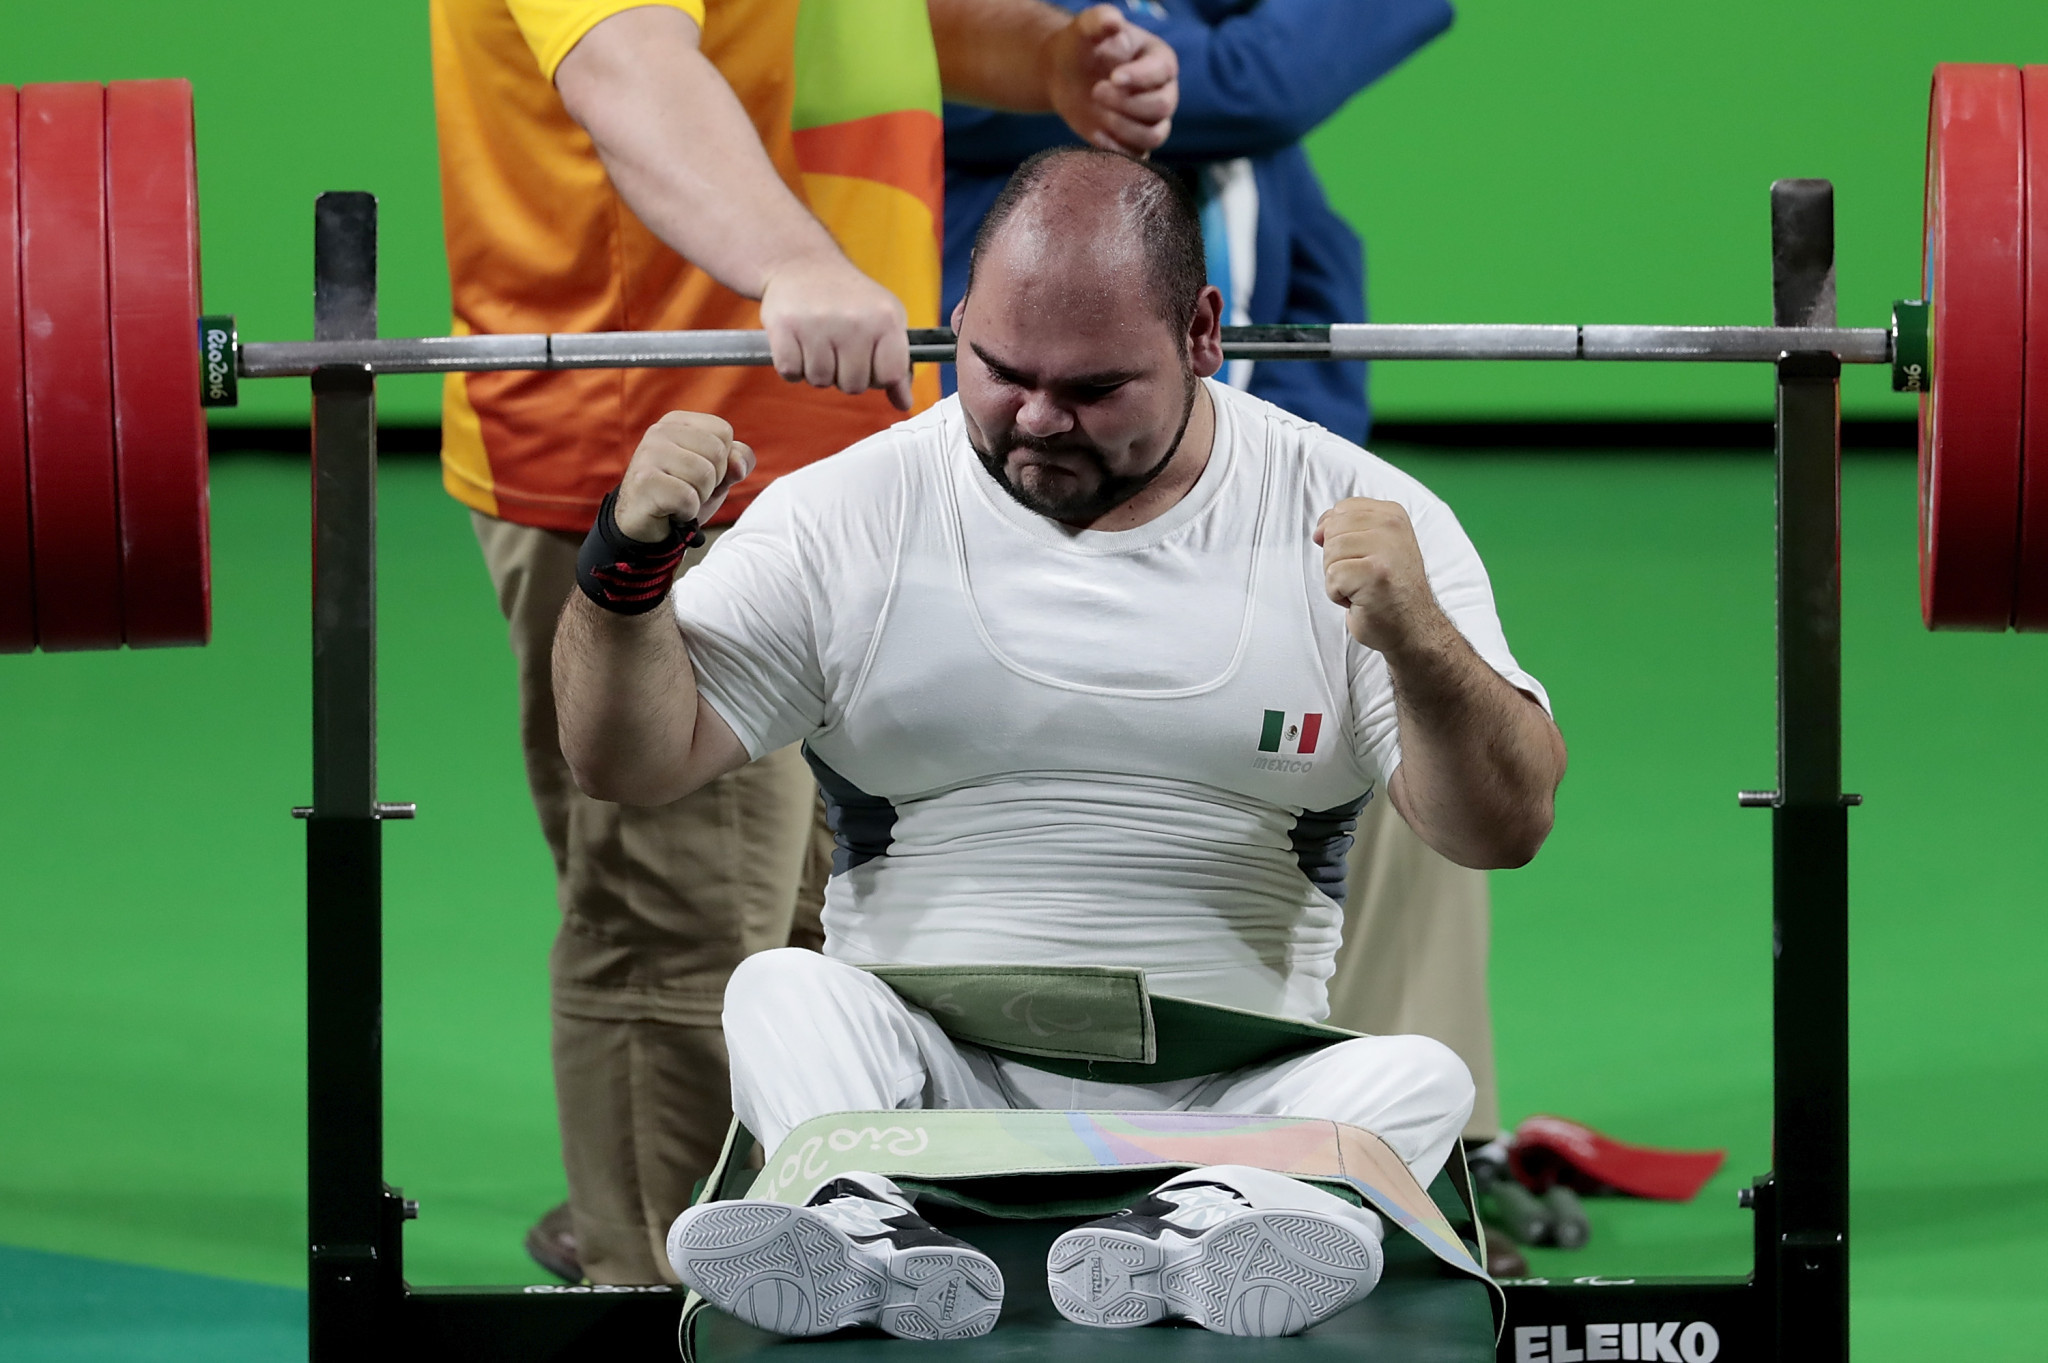 Mexican powerlifter Jose de Jesus Castillo Castillo has won the APC Athlete of the Year award ©Getty Images